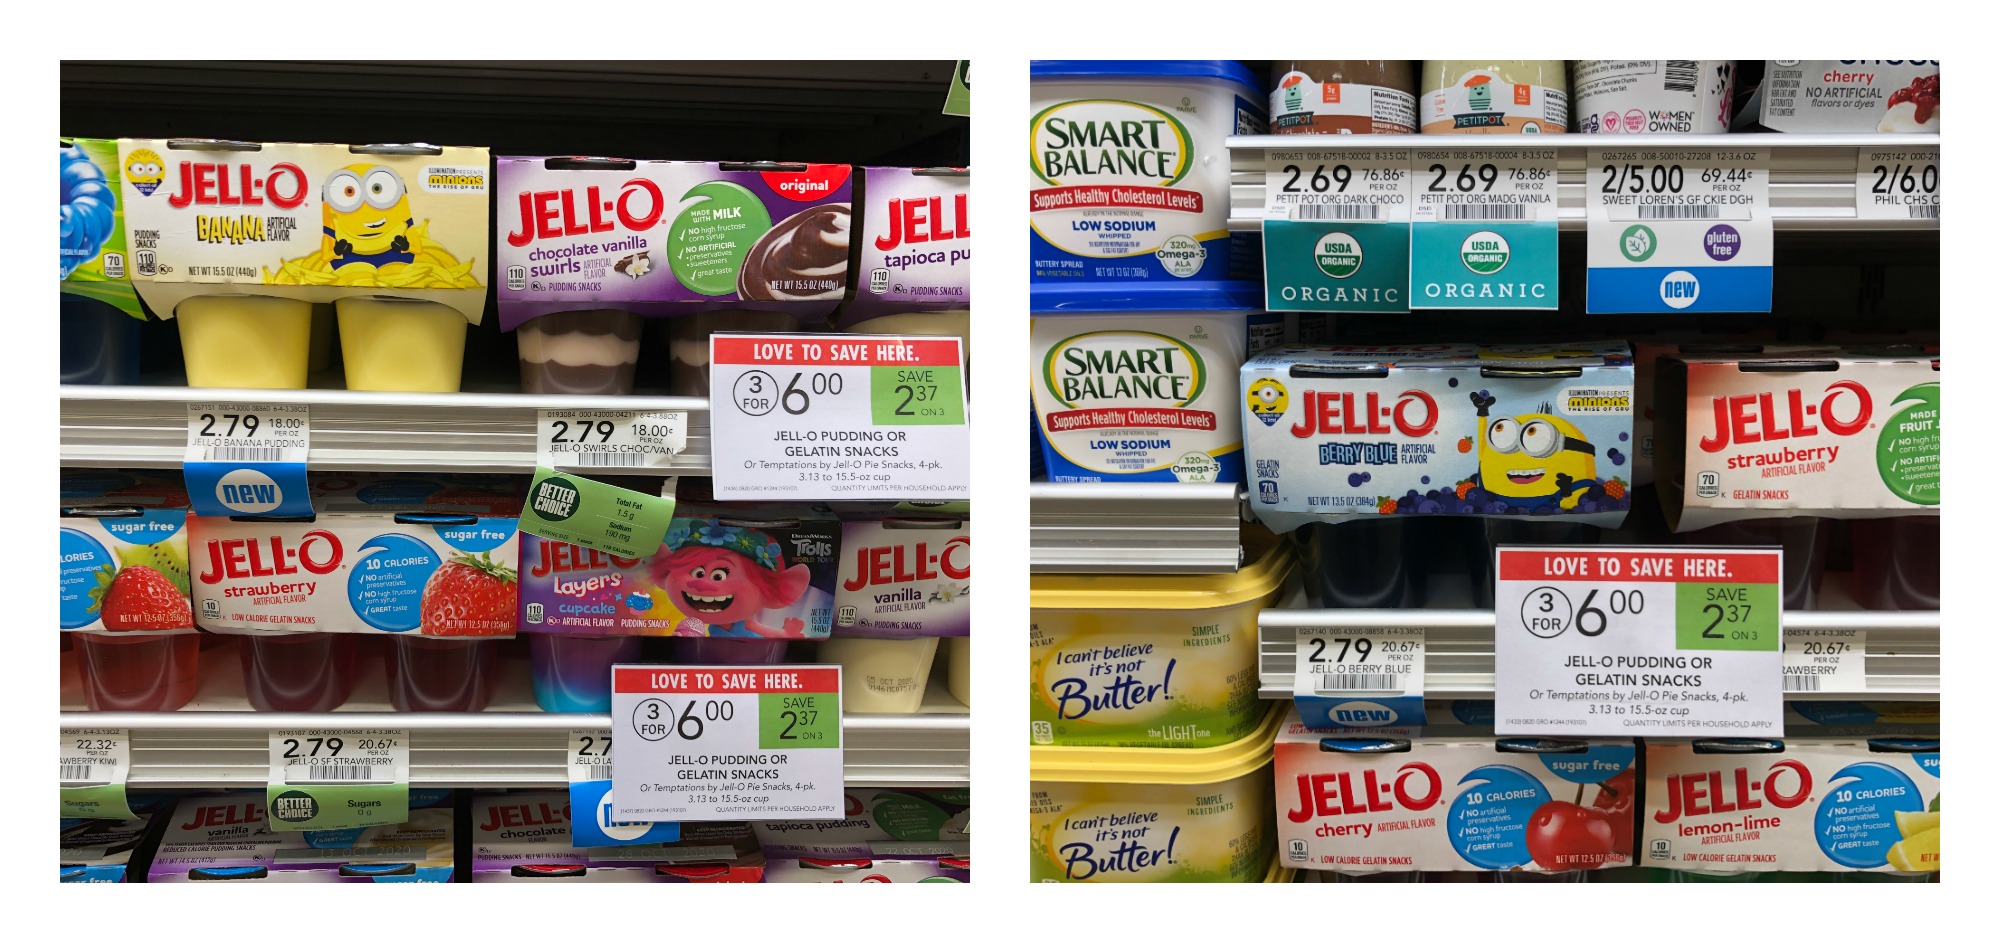 Pick Up A Fantastic Deal On Jell-O Pudding & Gelatin Snacks At Publix - Look For Limited Edition Minions and Trolls Themed Snacks! on I Heart Publix 1